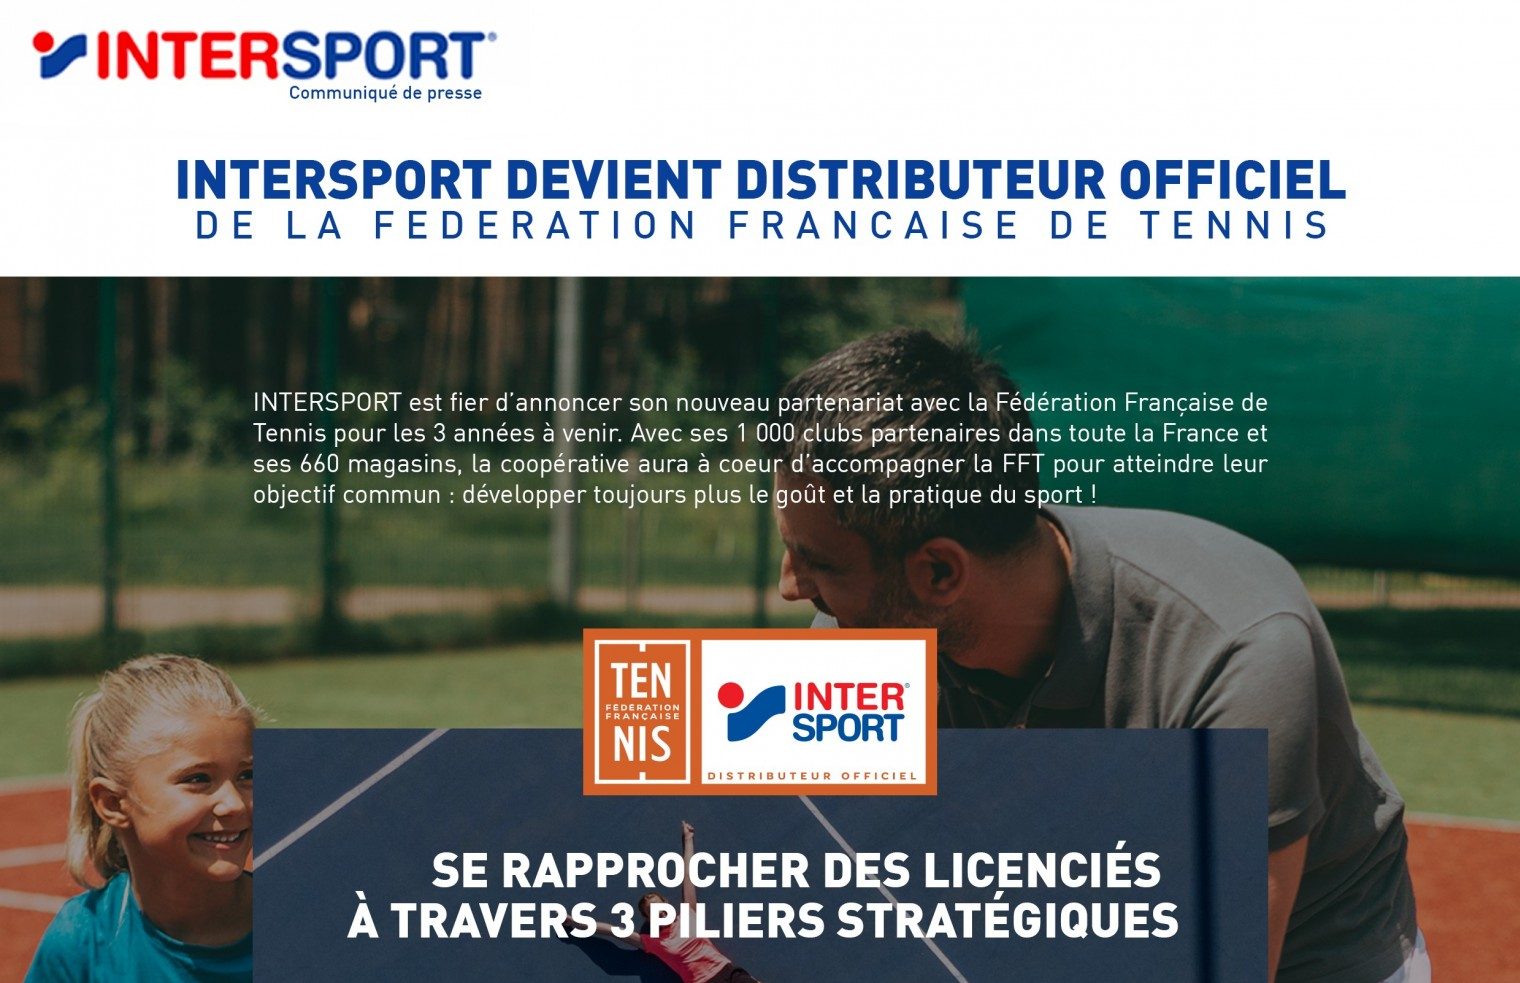 INTERSPORT and the FFT: Partner